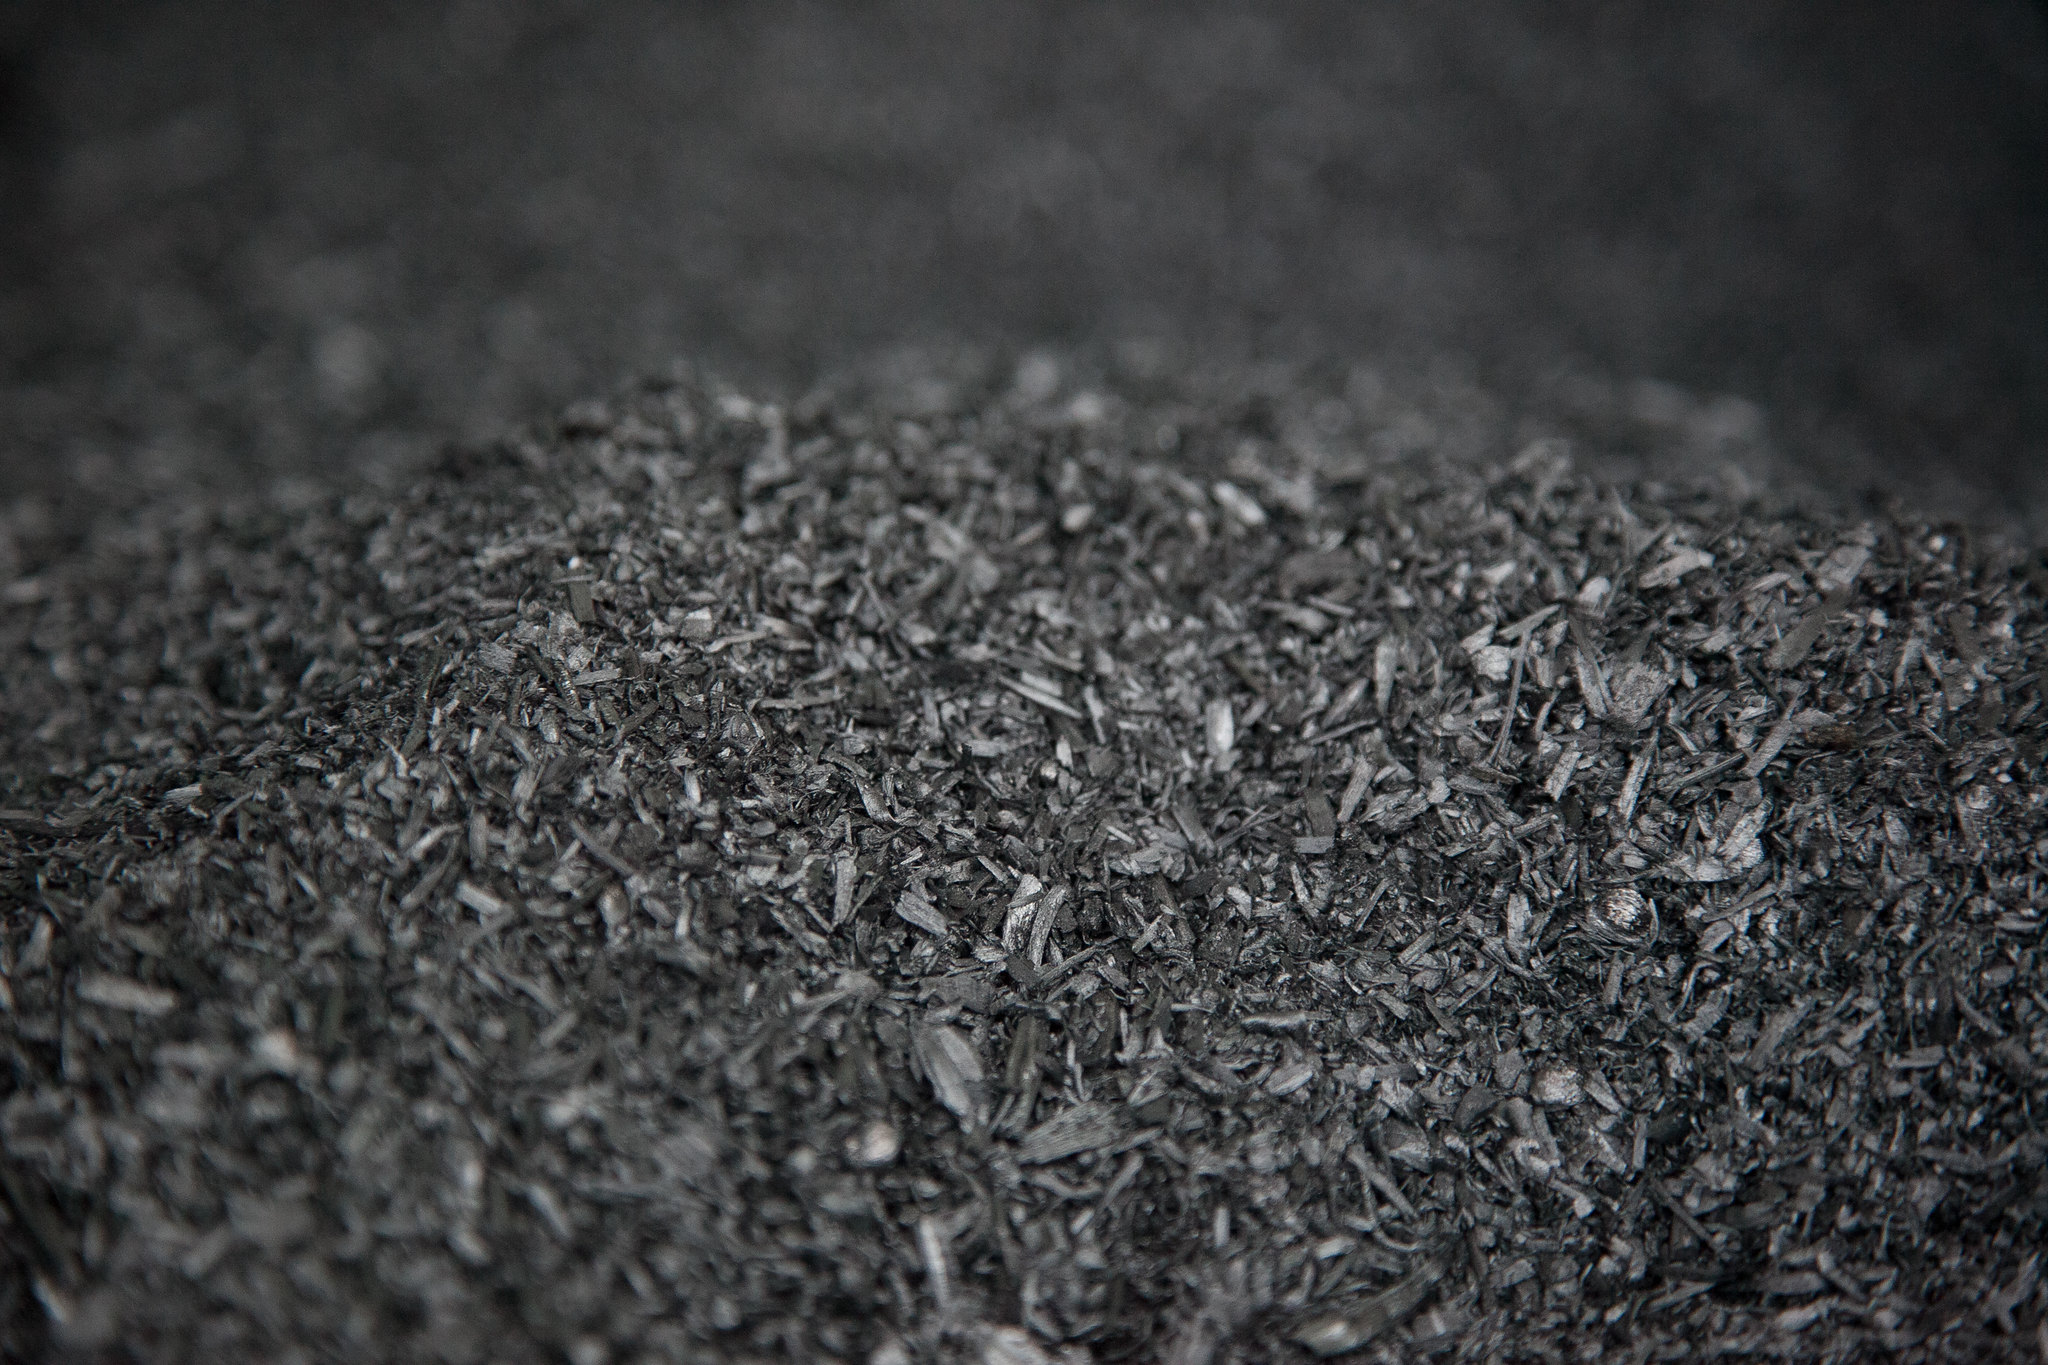 Biochar (Image: Oregon Department of Forestry/Flickr, CC BY 2.0)